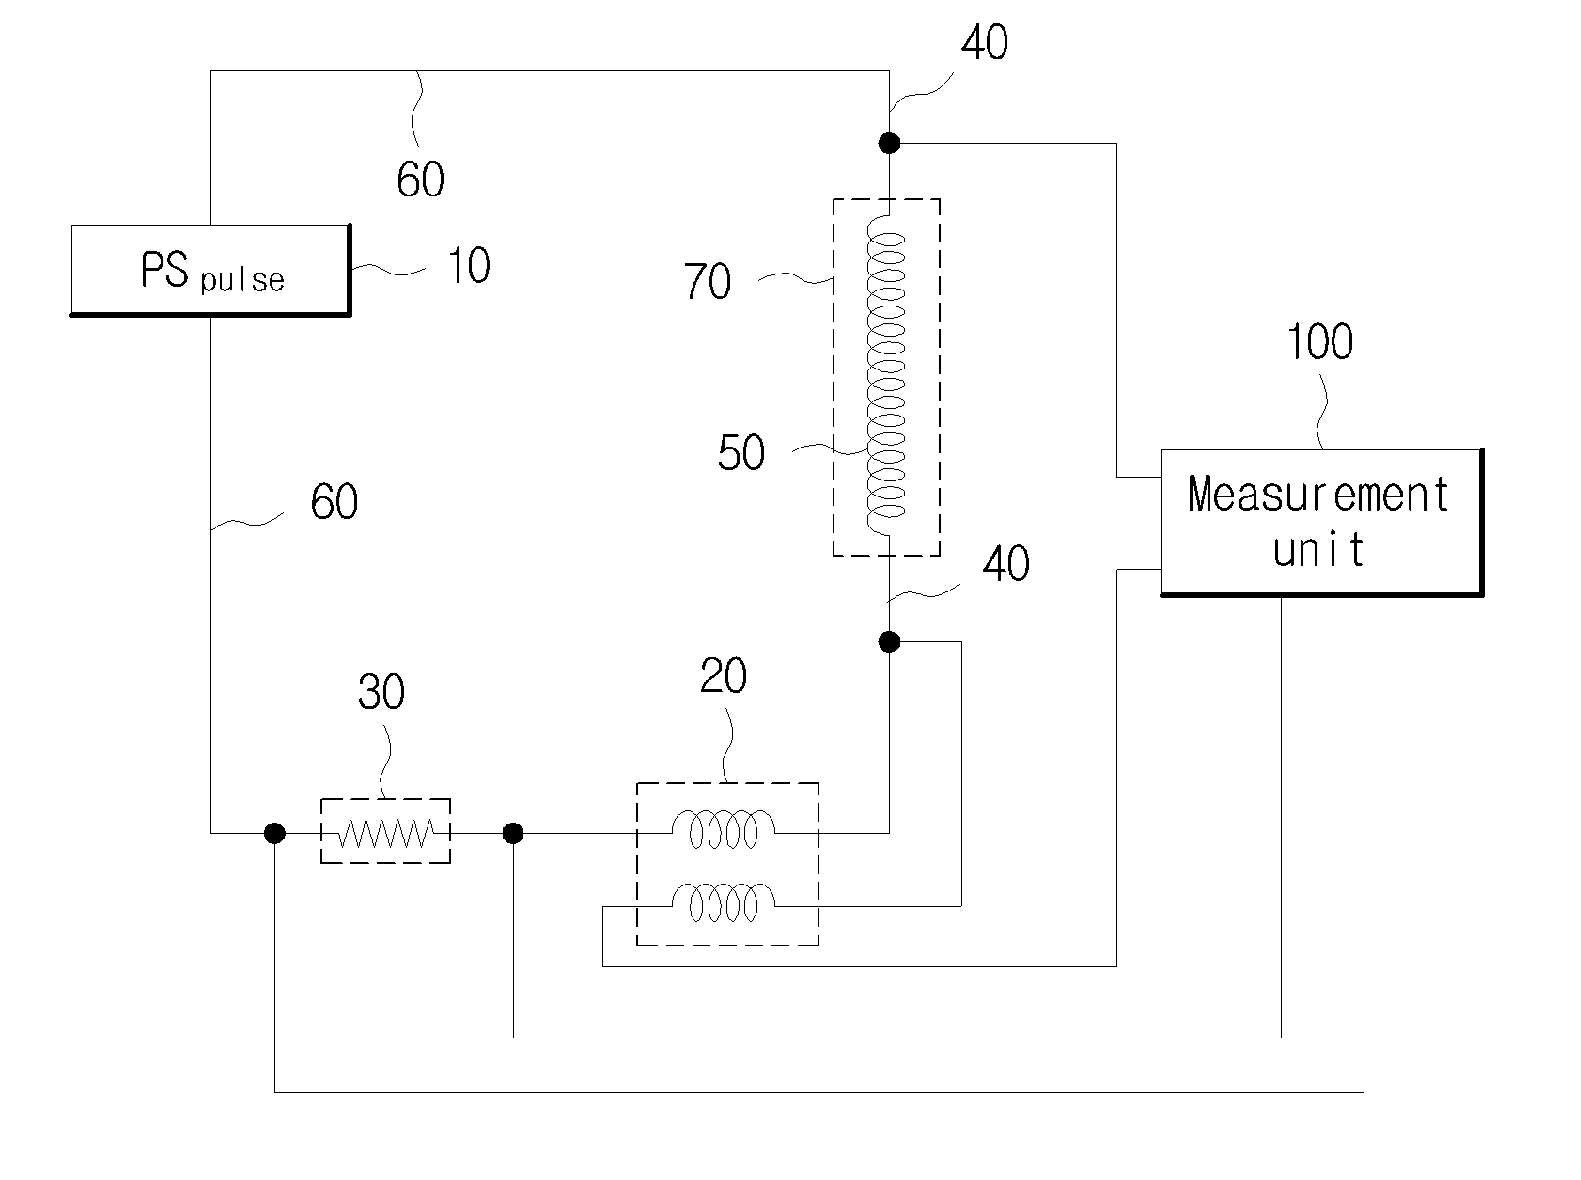 Ac loss measurement device of high-temperature superconductor